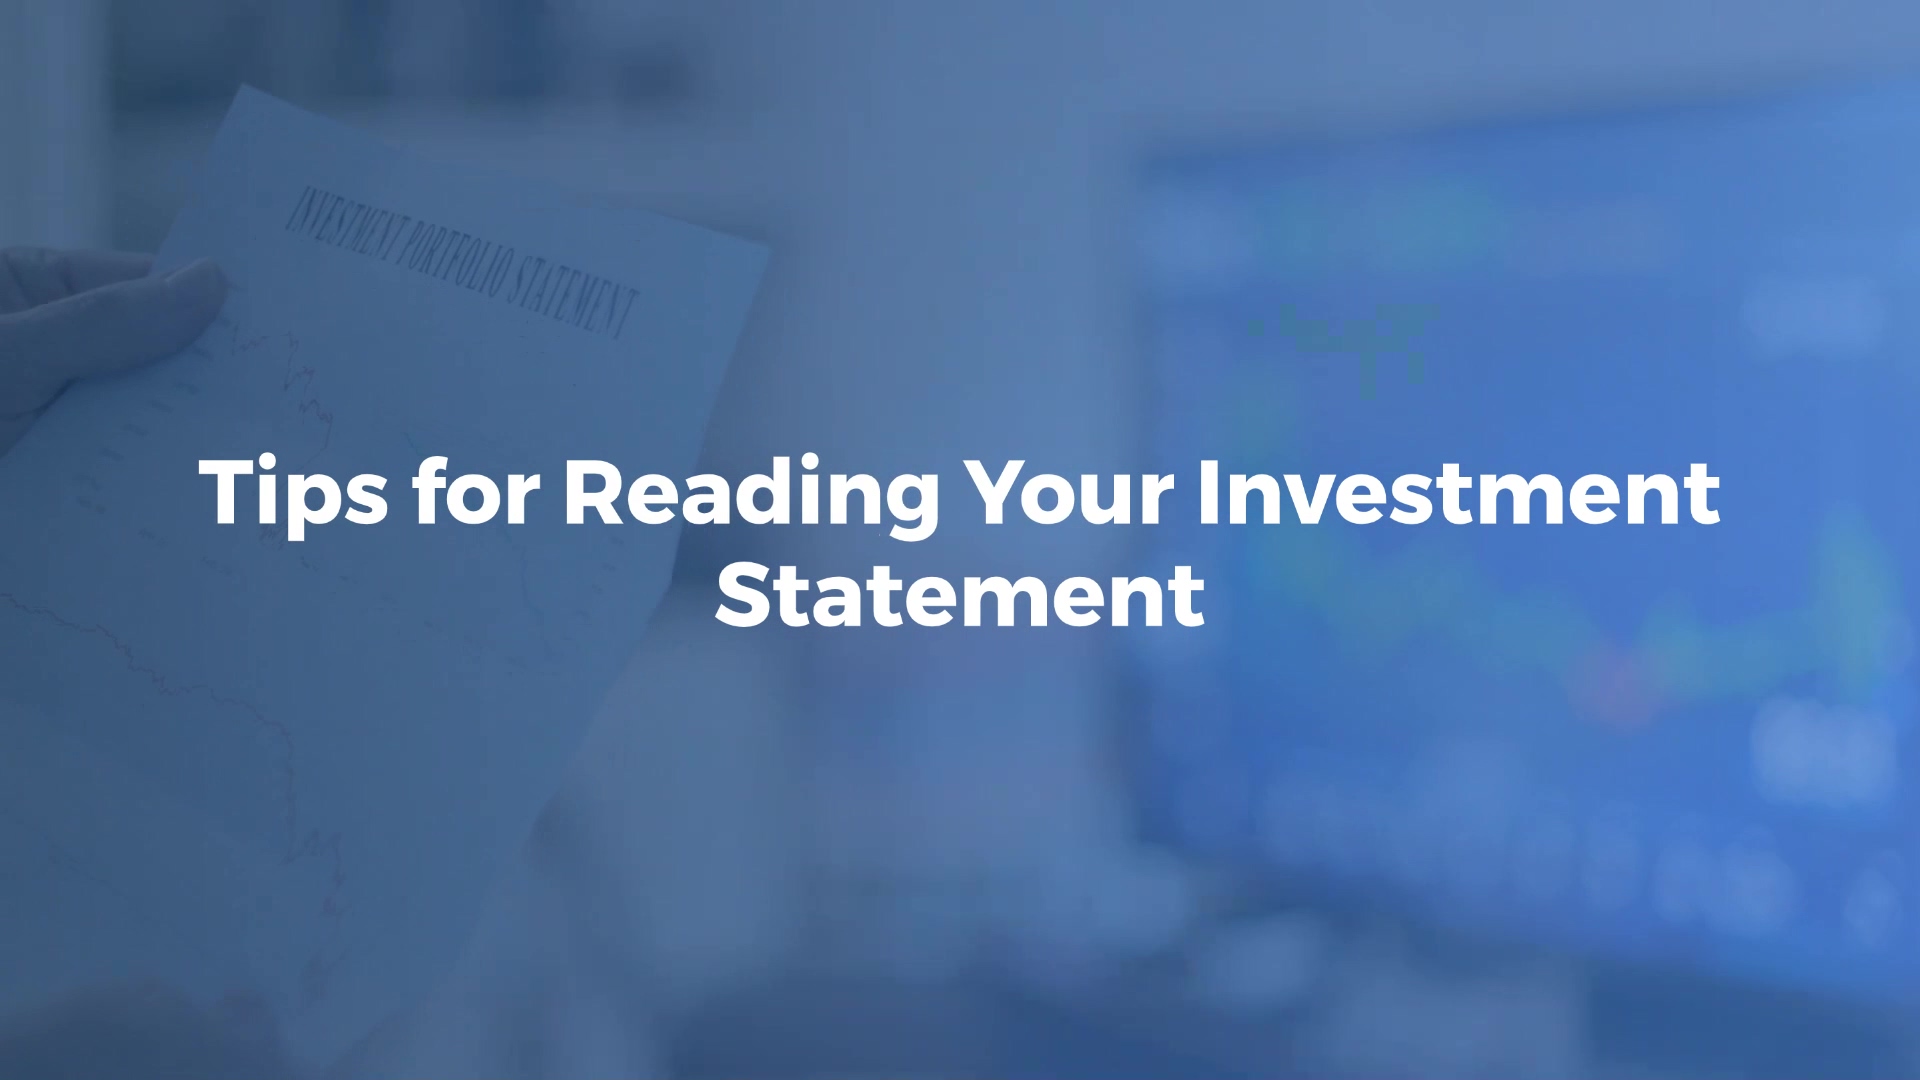 Tips_for_Reading_Your_Investment_Statement